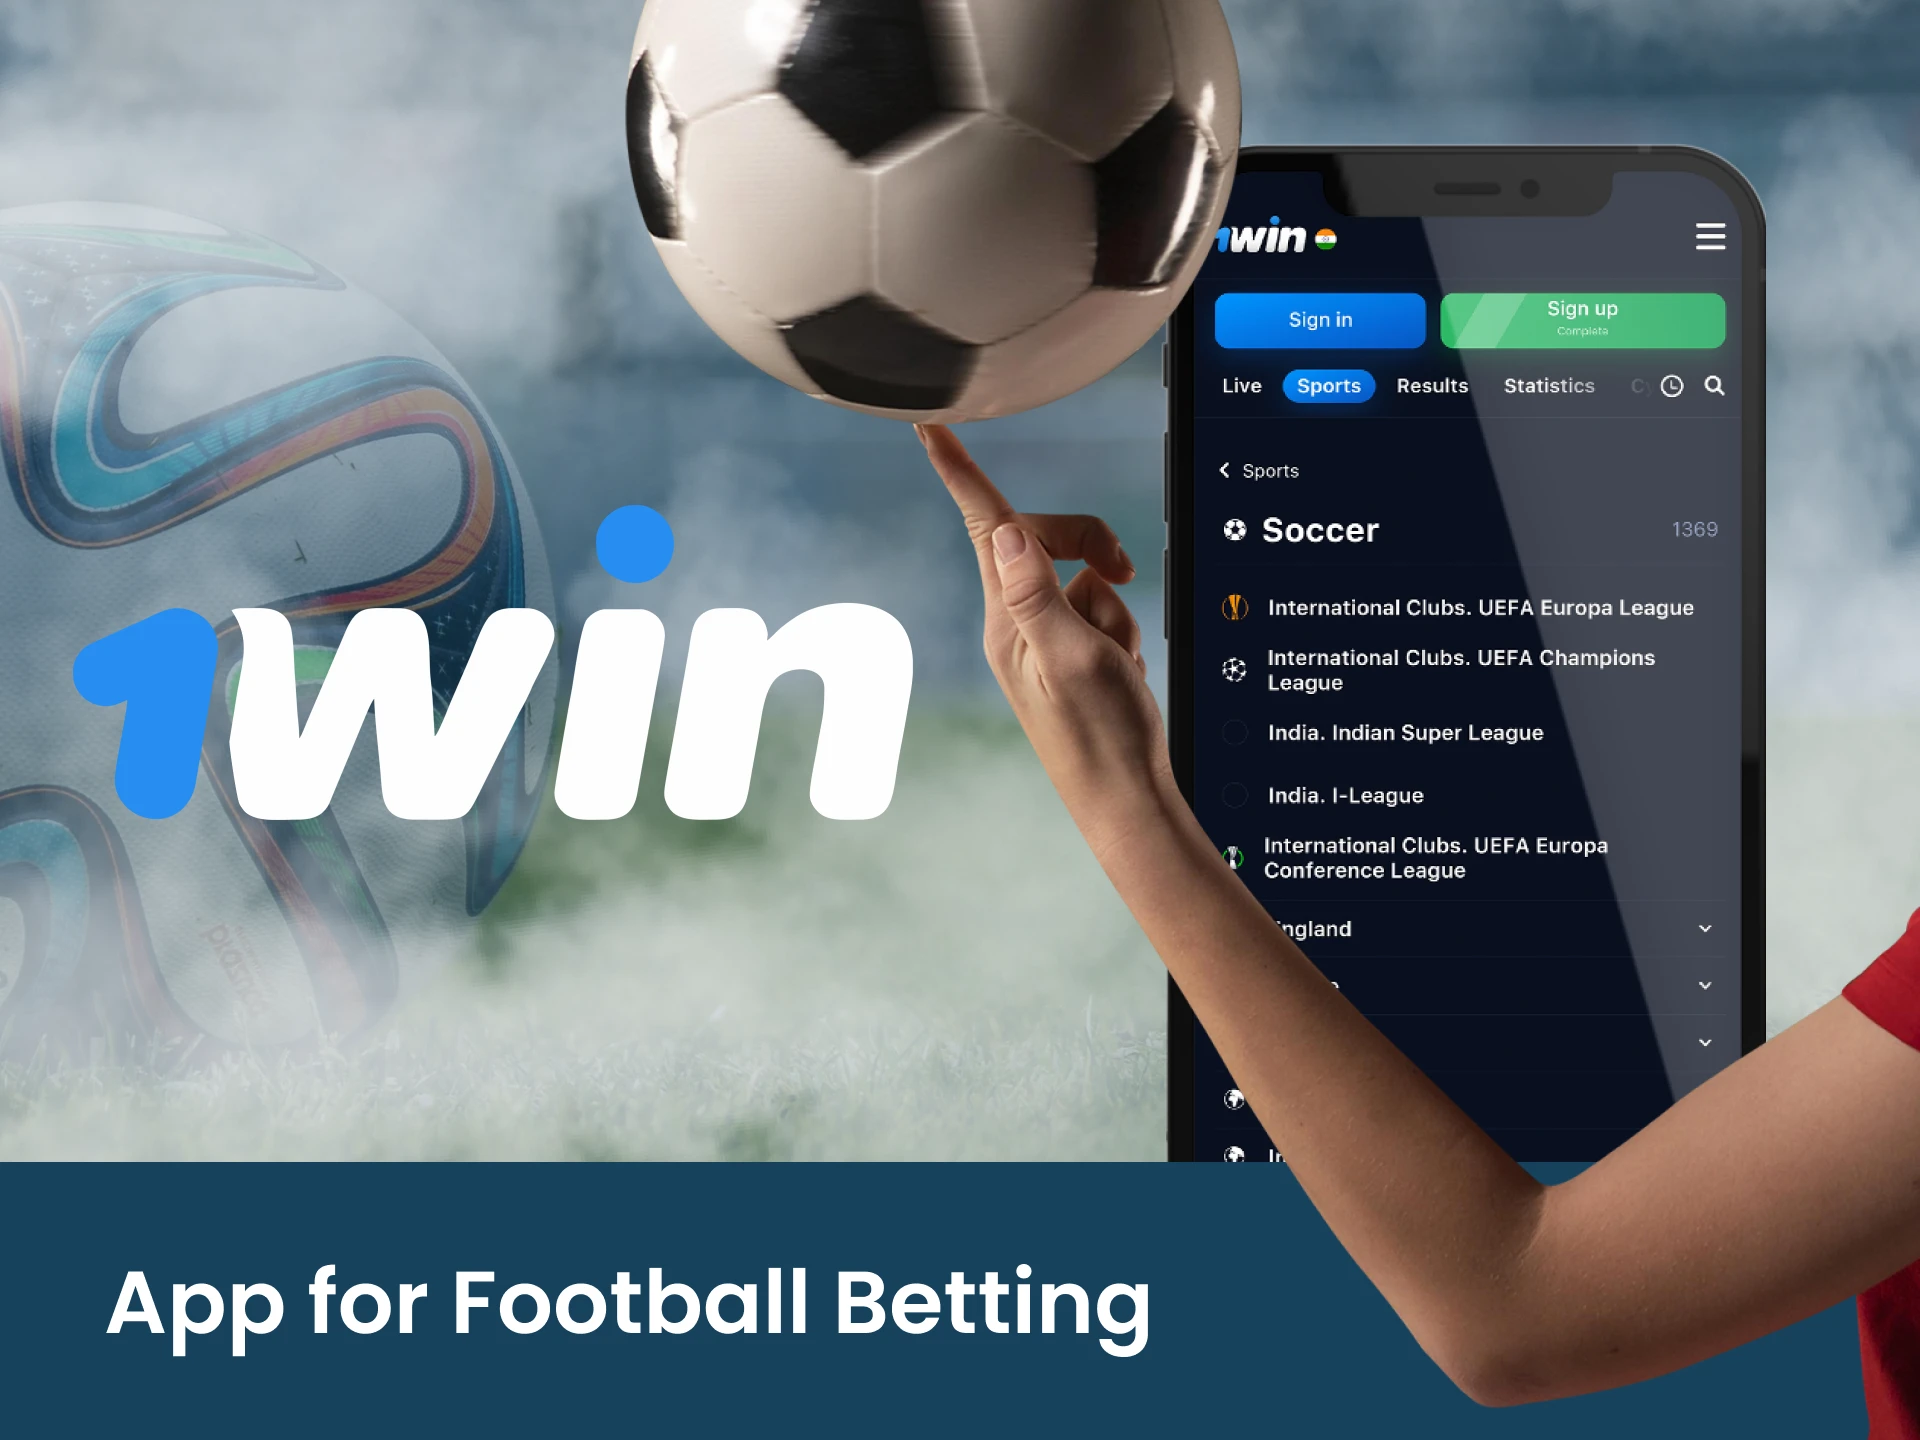 Download the 1Win app for football betting.